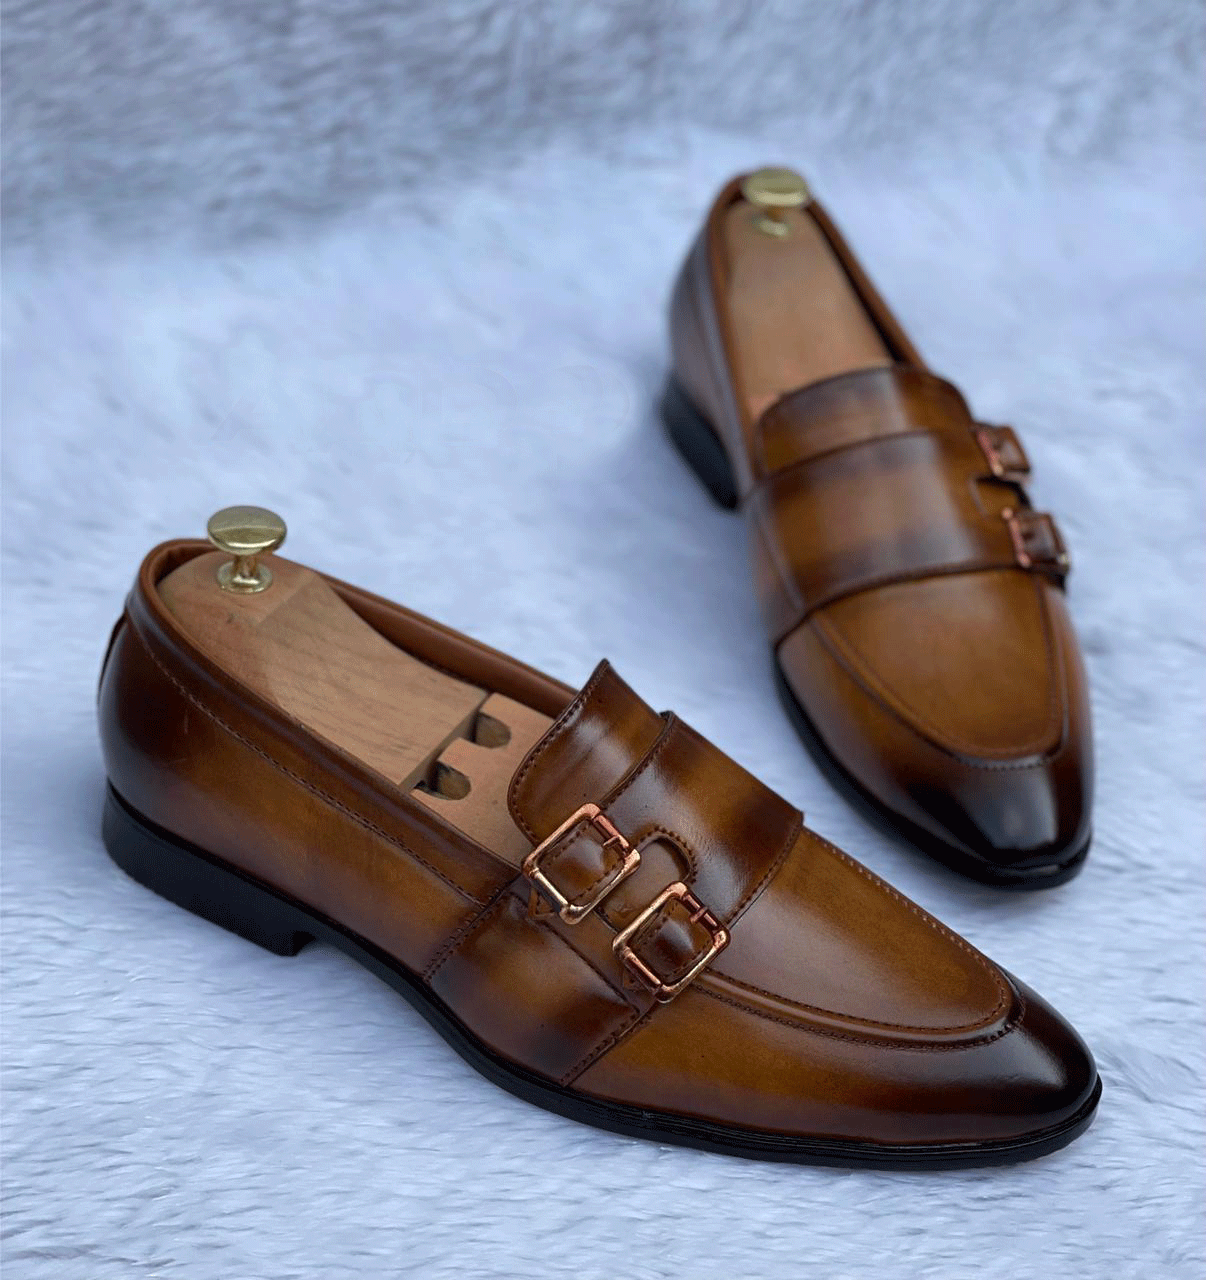 Classic Patent Monk Formals With Tassels For Men-Unique and Classy